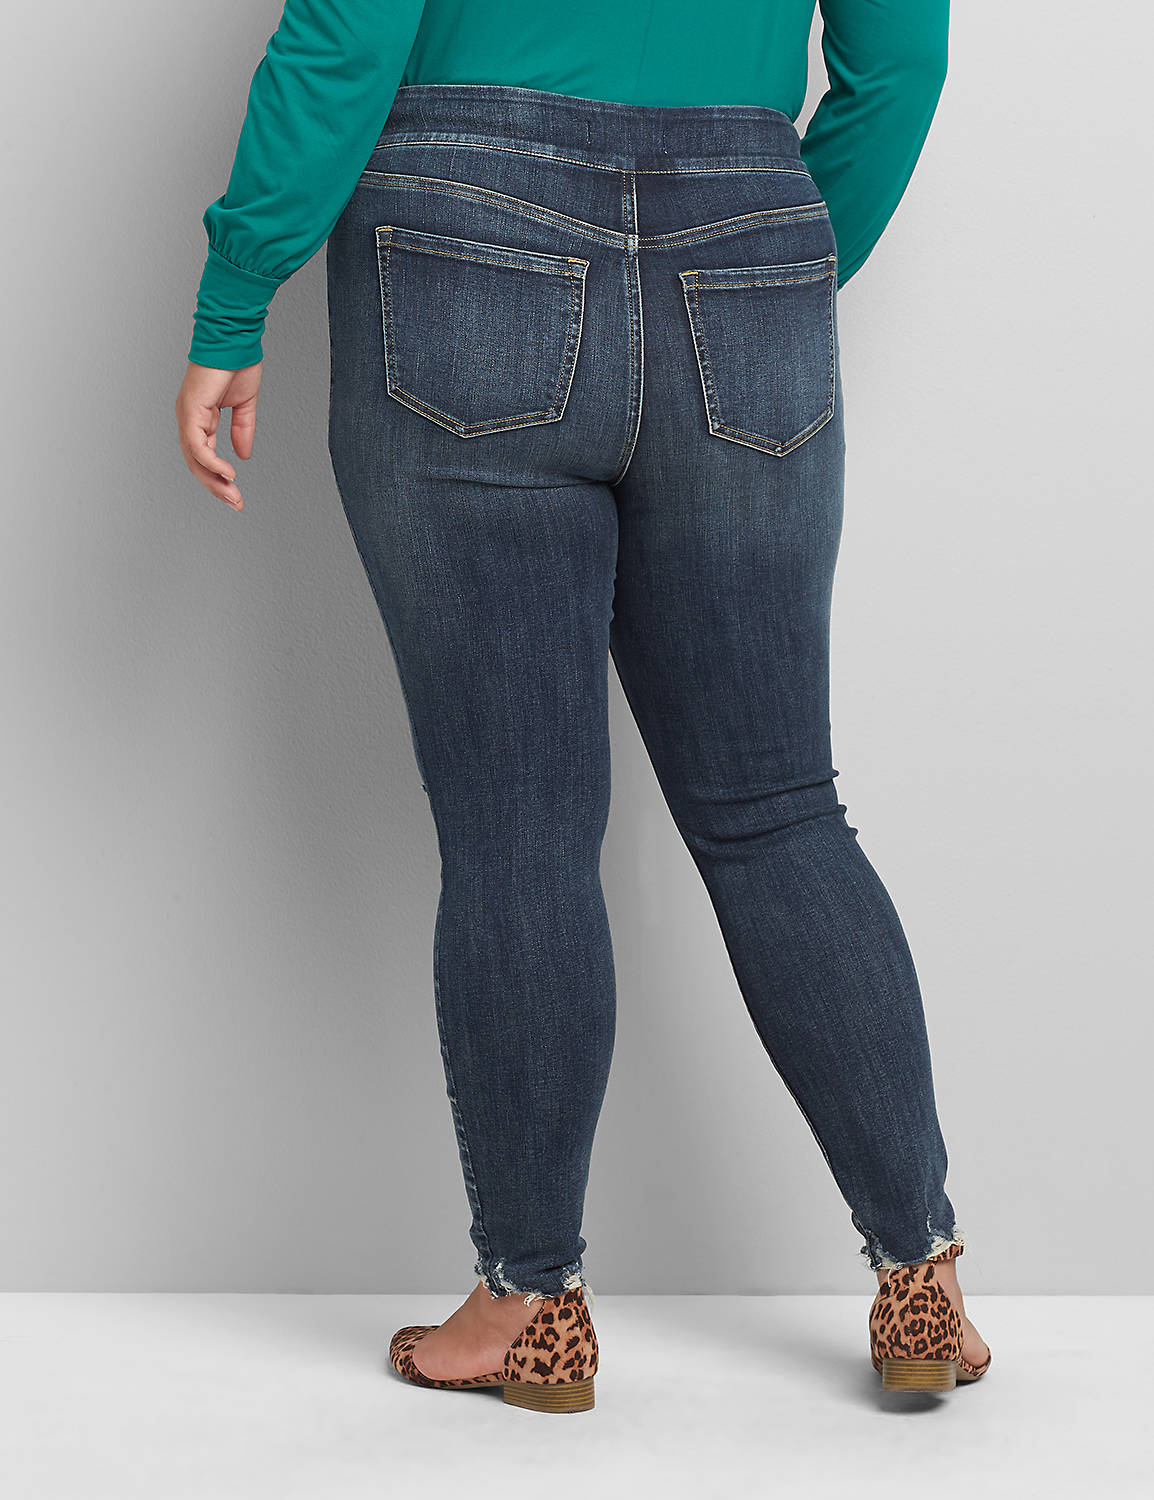 High-Rise Pull-On Jegging - Ripped Dark Wash Product Image 2